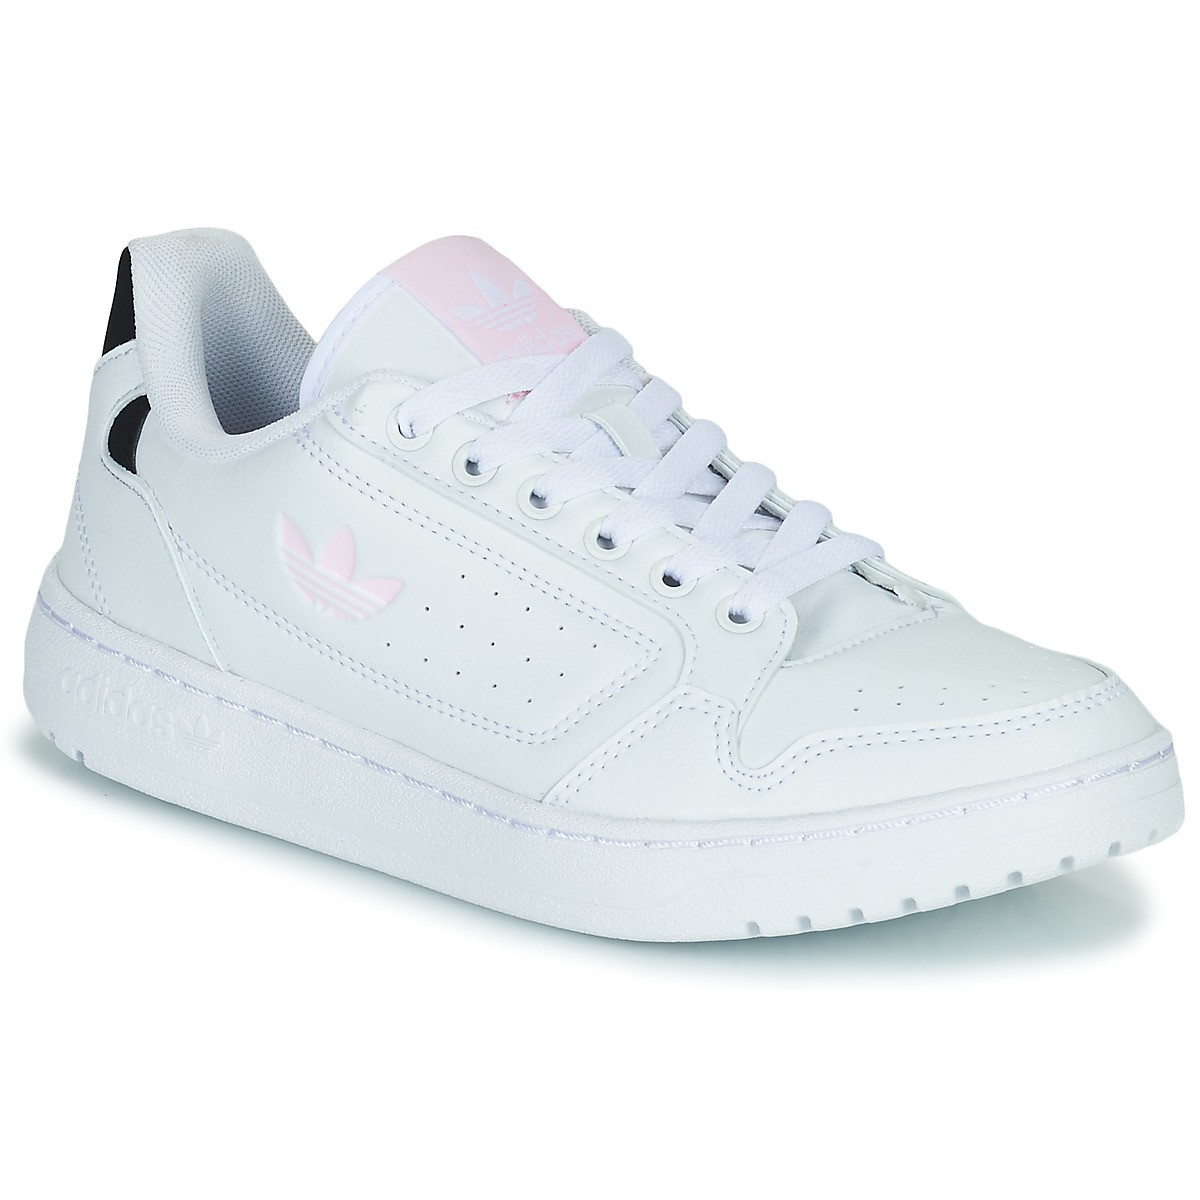 adidas Originals NY 90 W White / Black / Pink - Free delivery | Spartoo NET  ! - Shoes Low top trainers Women